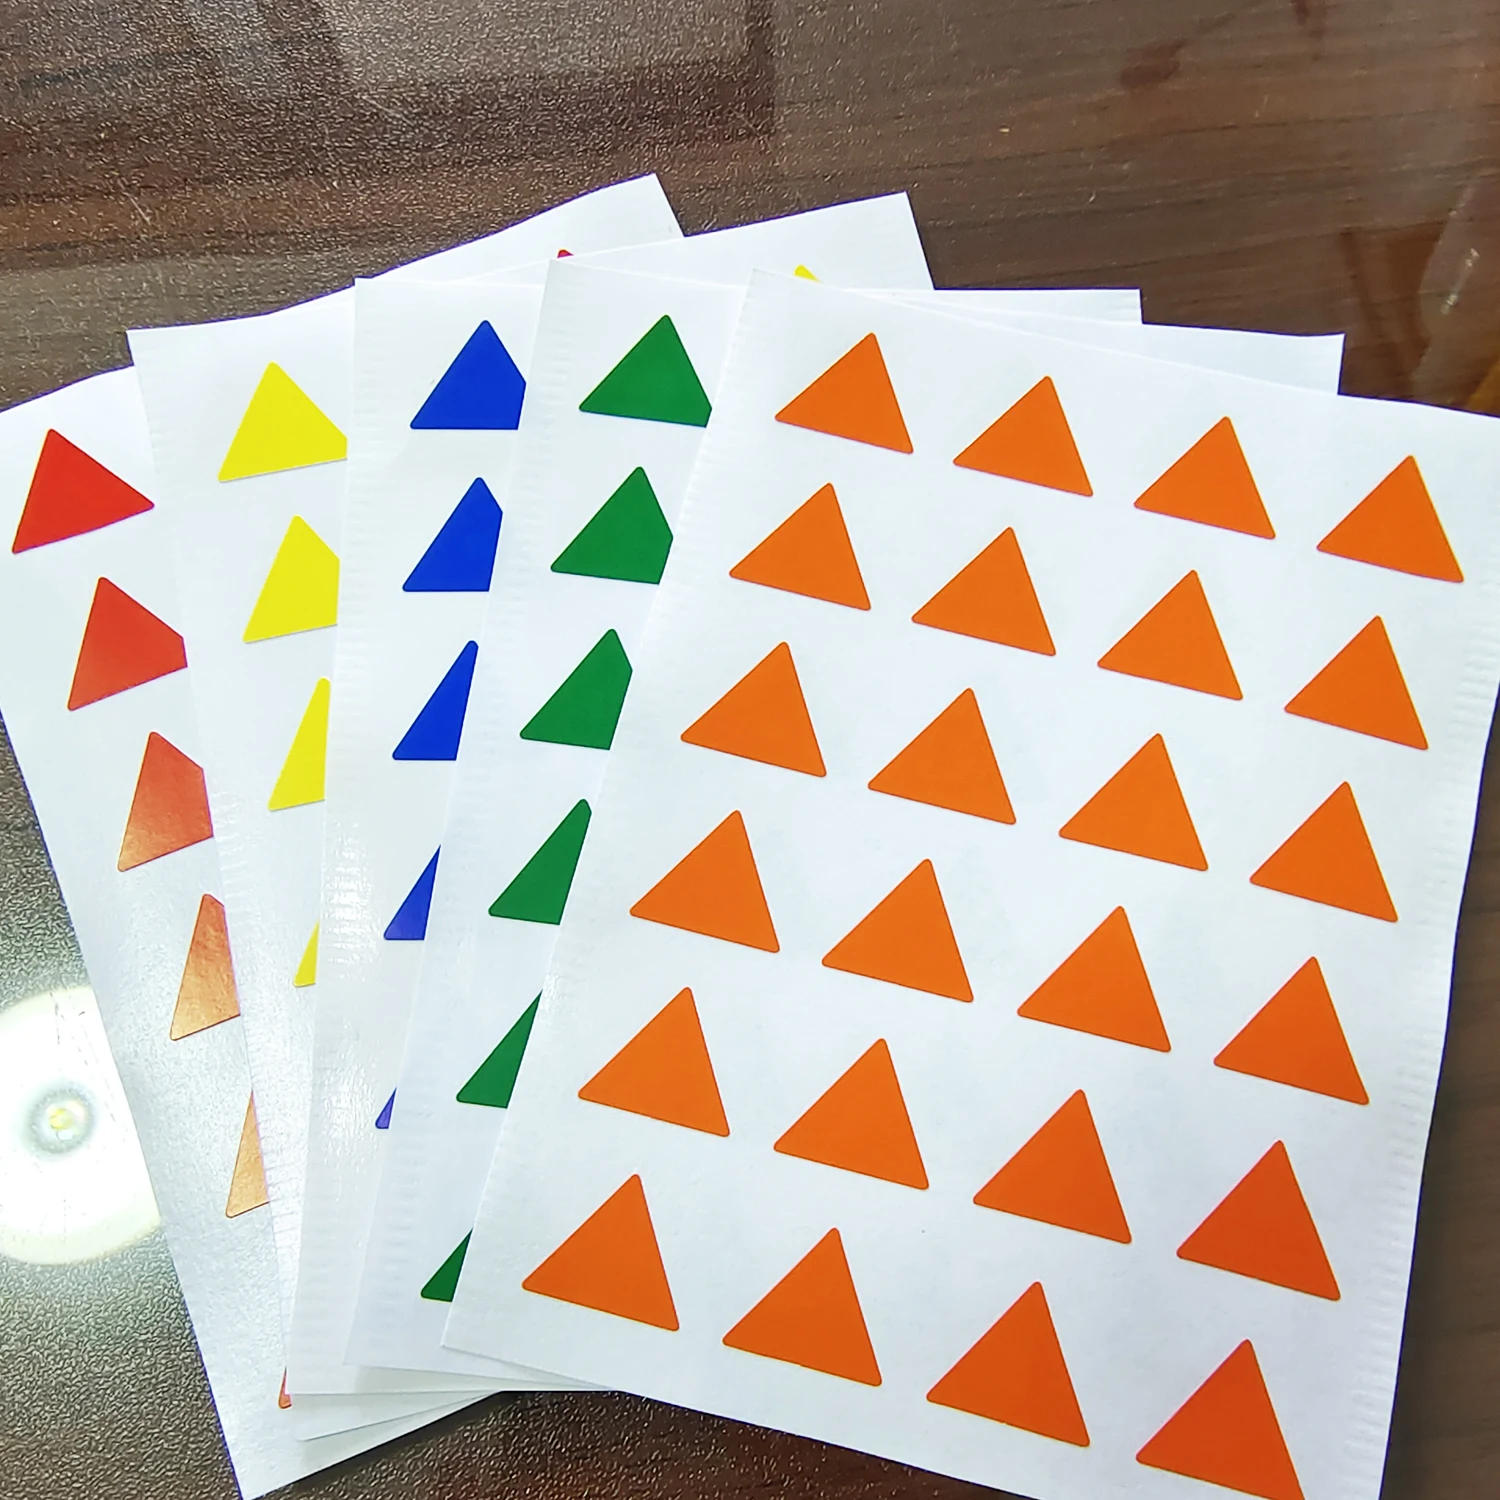 240pcs 16x14mm Triangle Colorful Stickers for Home Office School Party Decoration or Daily Things Clear Classification OF07